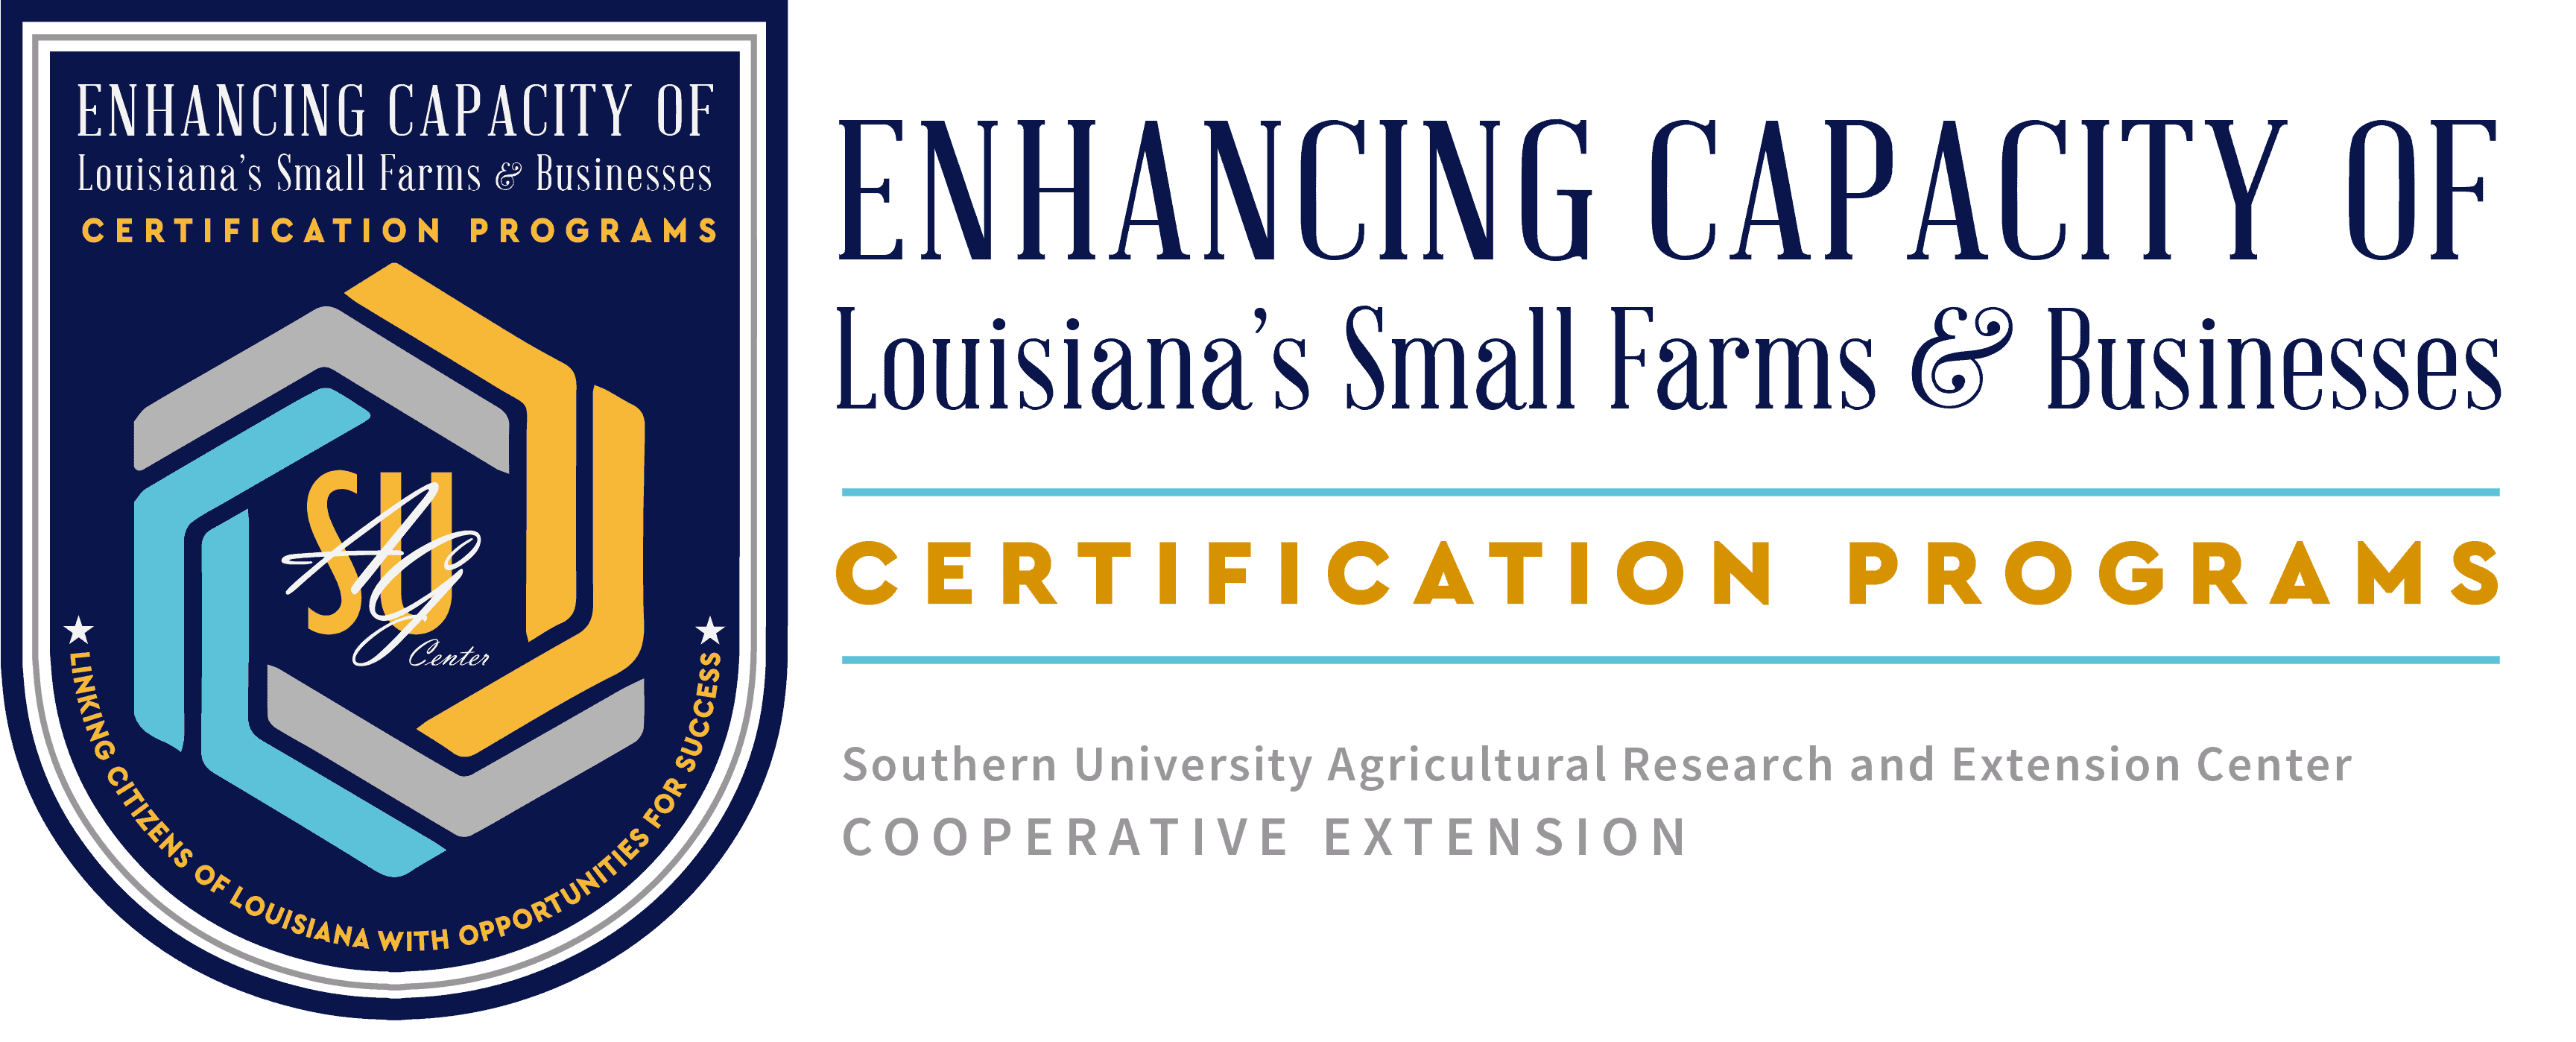 Enhancing Capacity of Louisiana’s Small Farms and Businesses